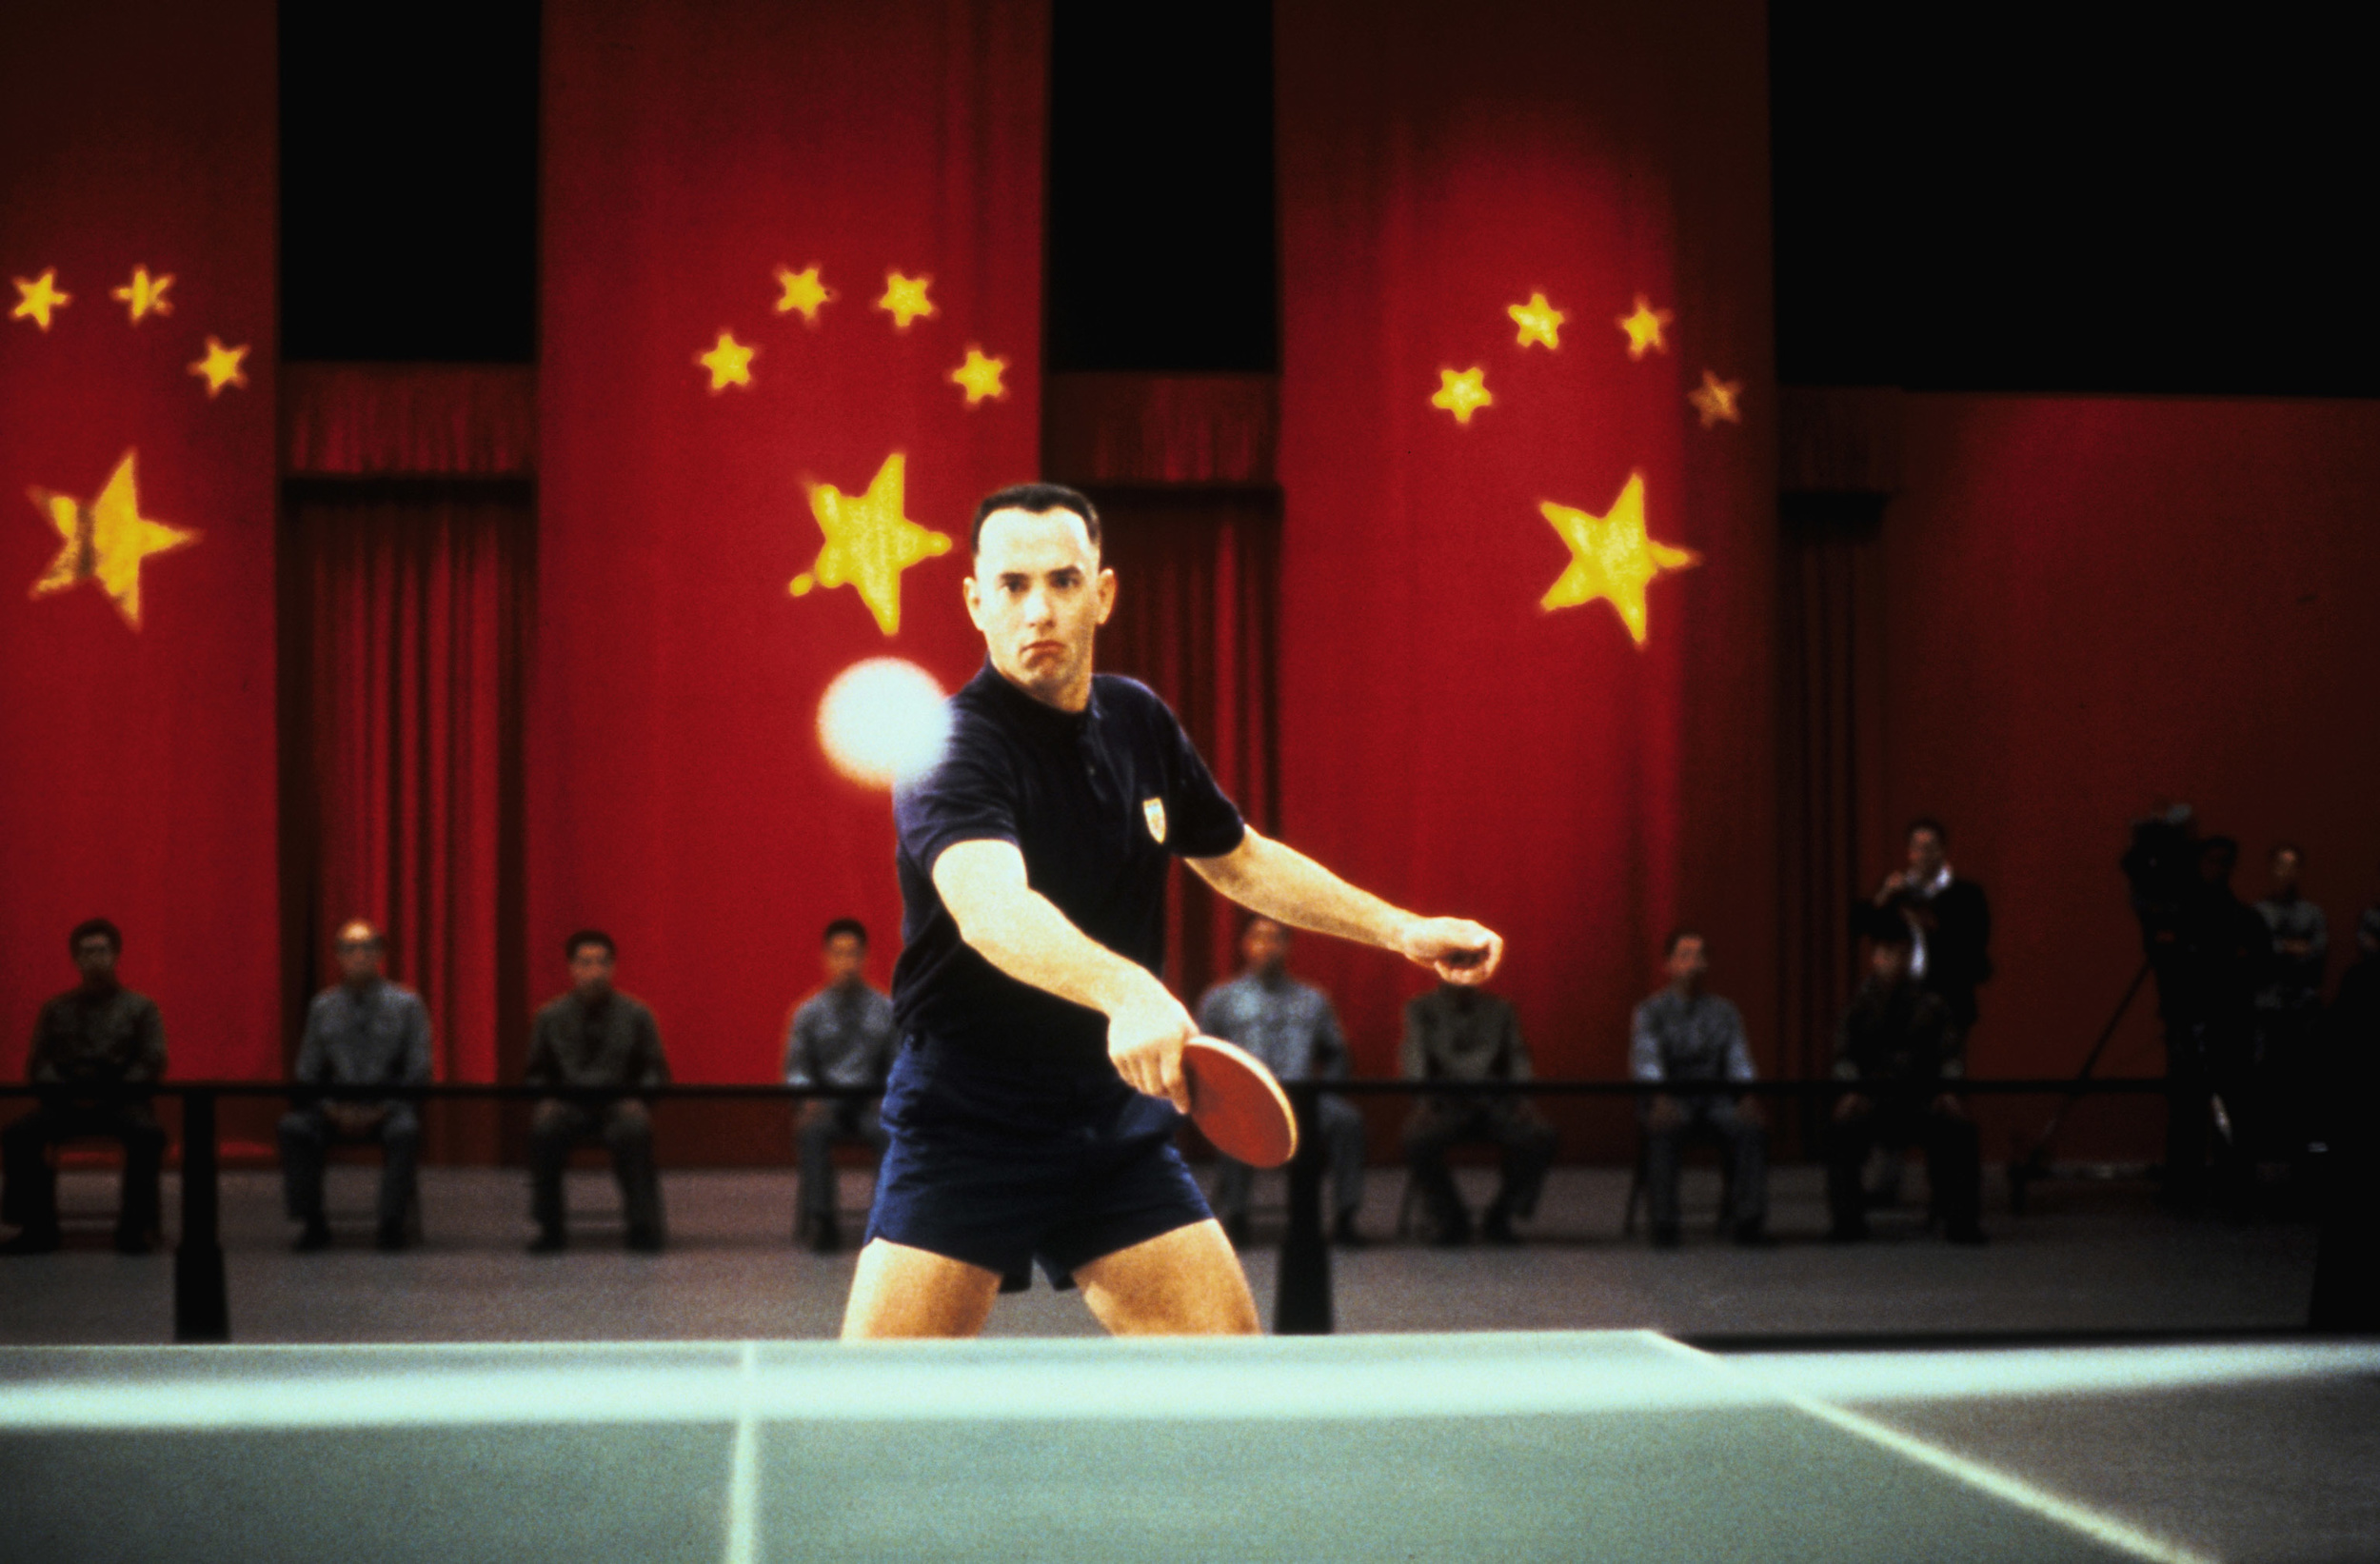 <p>In the film, Forrest is given a recommendation on how to improve at table tennis: Keep your eye on the ball. Forrest takes that literally. Hanks went so far as not to blink in any of the scenes where Forrest plays ping pong, and there are quite a few.</p><p>You may also like: <a href='https://www.yardbarker.com/entertainment/articles/25_movies_that_will_really_mess_with_your_head/s1__39060406'>25 movies that will really mess with your head</a></p>